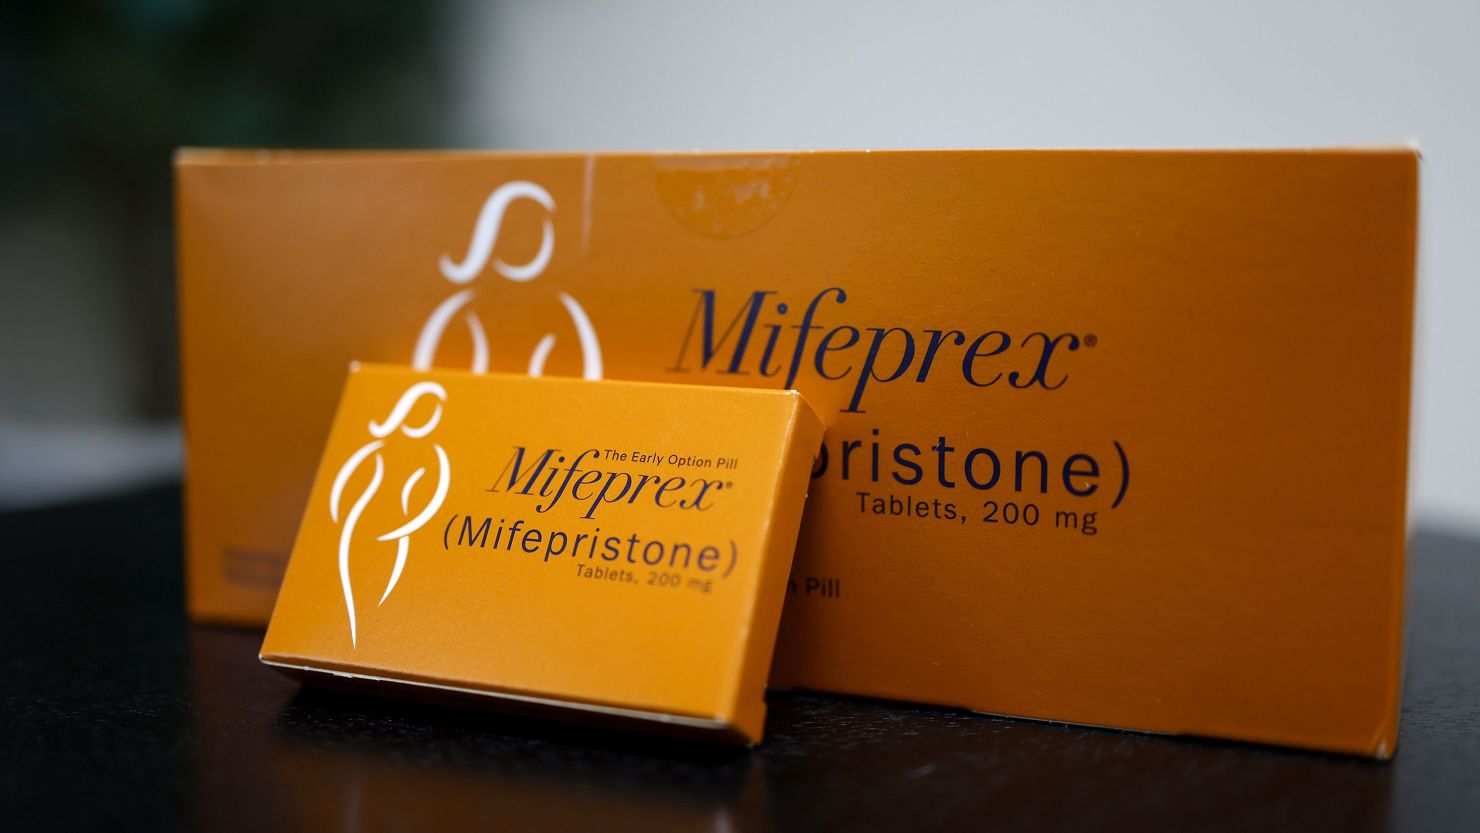 Packages of Mifepristone tablets are displayed.